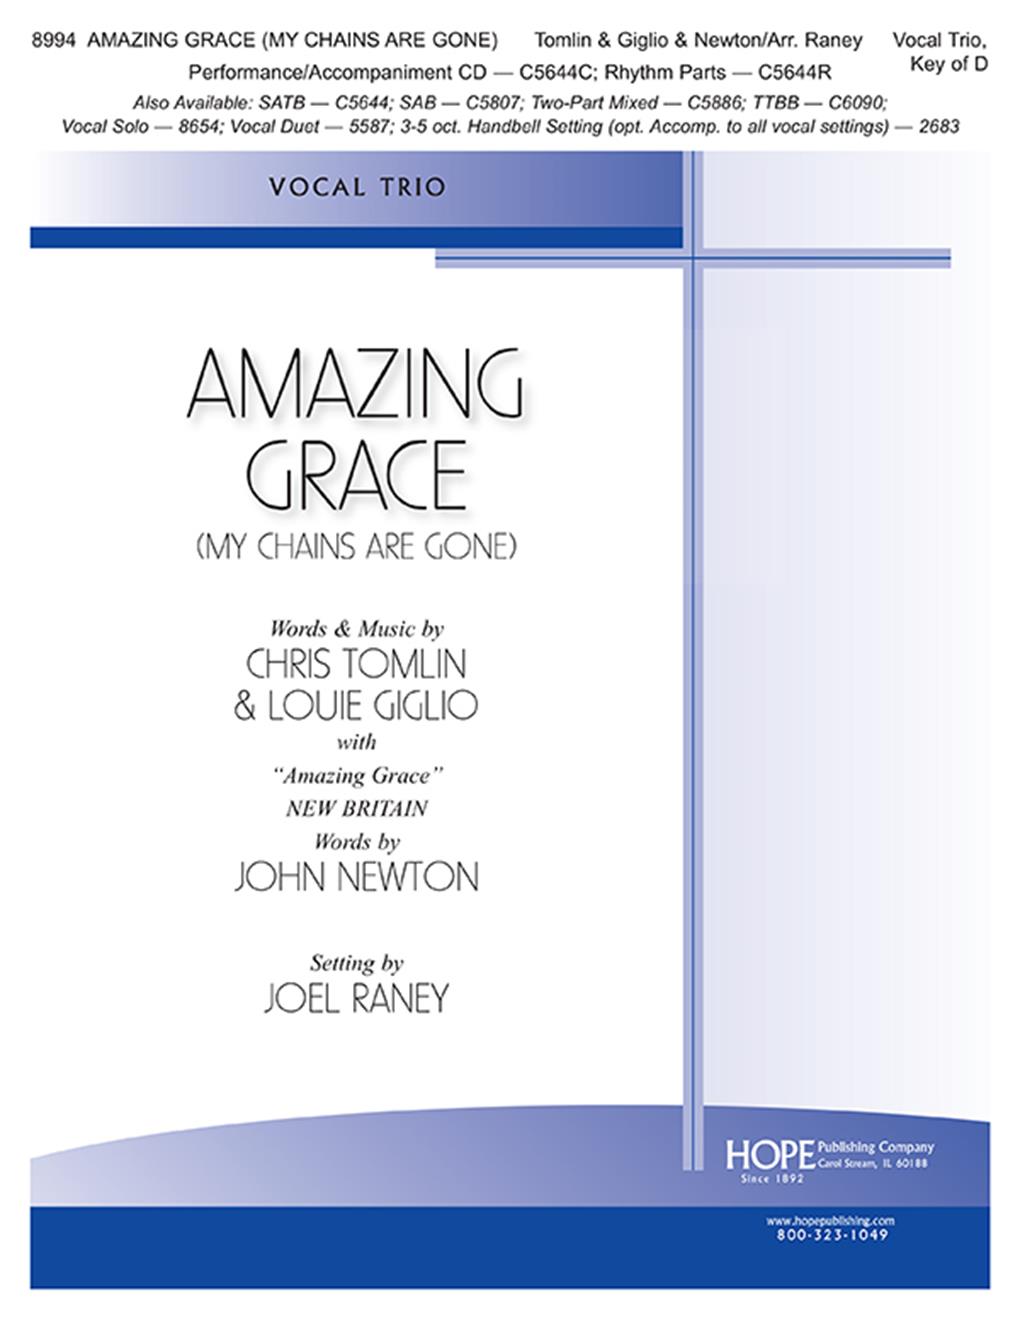 Chris Tomlin Louie Giglio John Newton: Amazing Grace (My Chains Are Gone): Voice